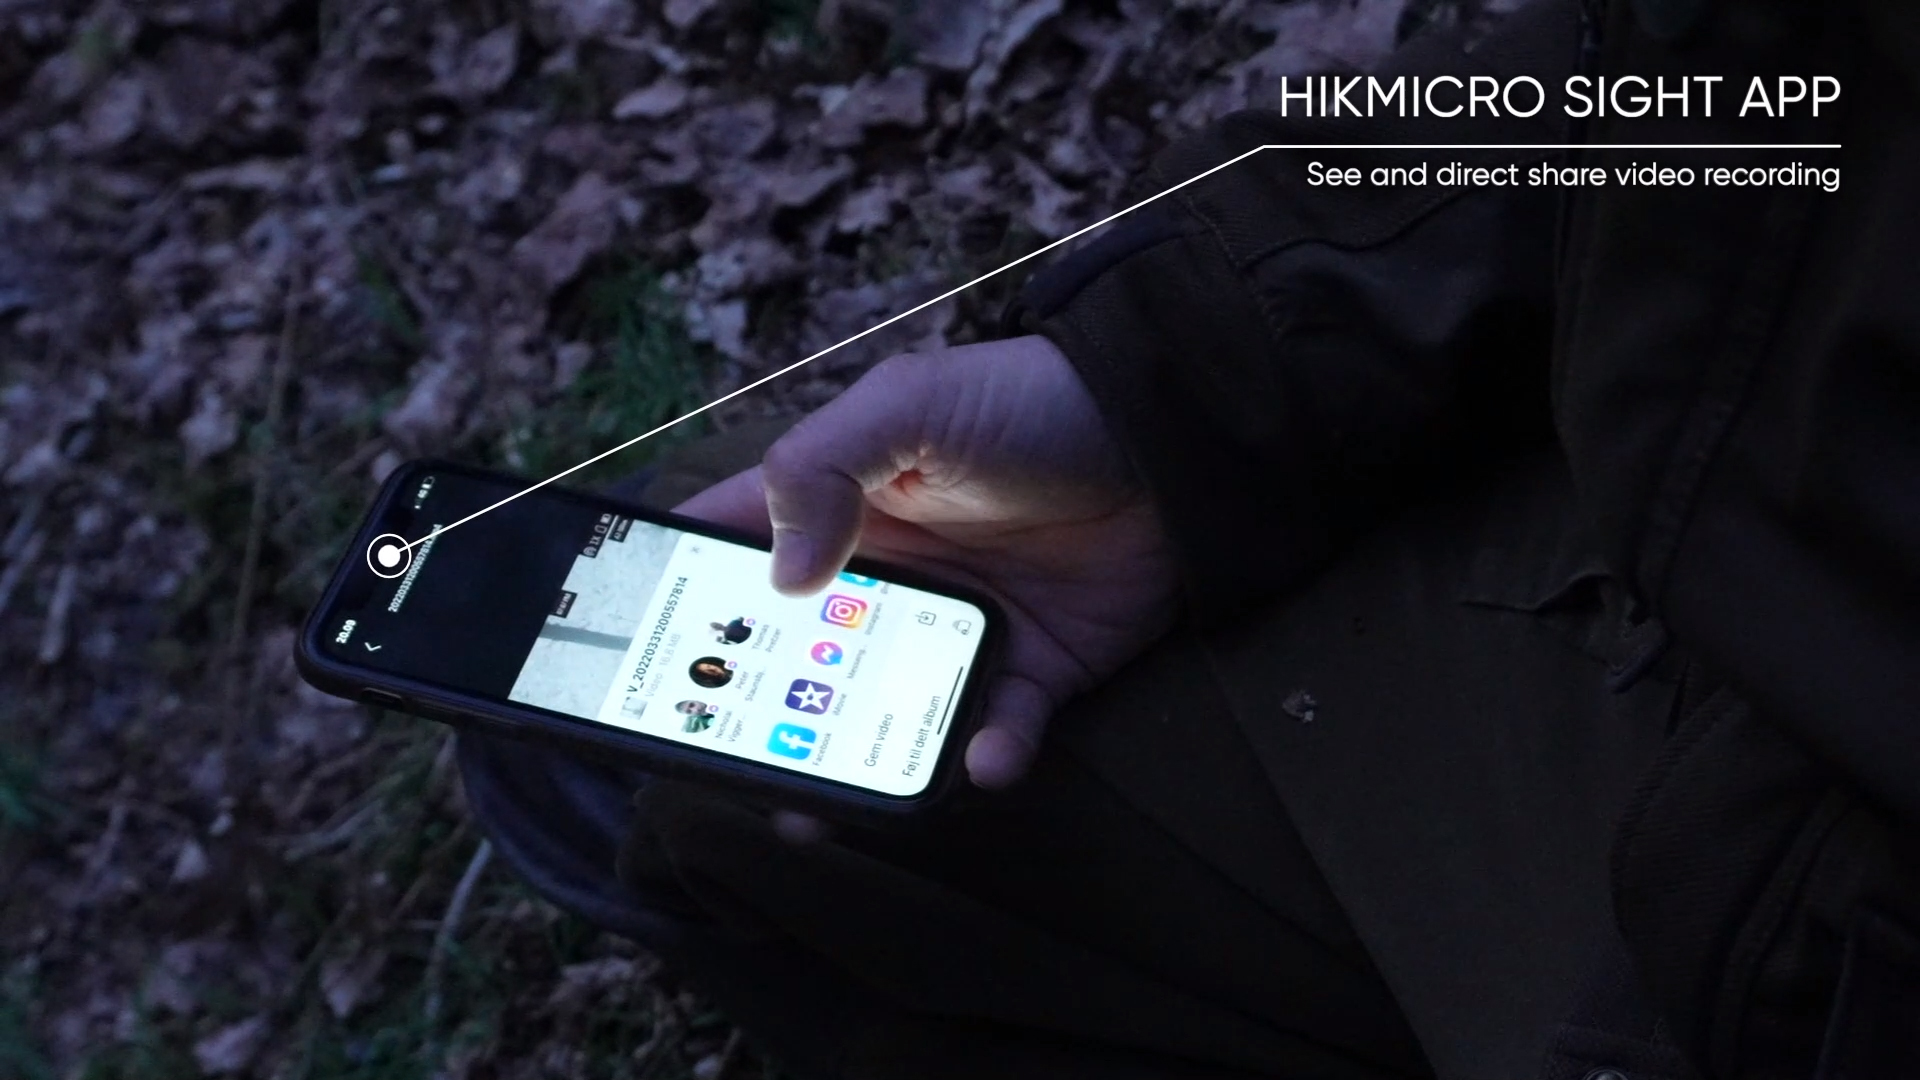 Hikmicro Stellar SH35 & SH50 Thermal Riflescope demostrating the ability to share data through social media, email etc.